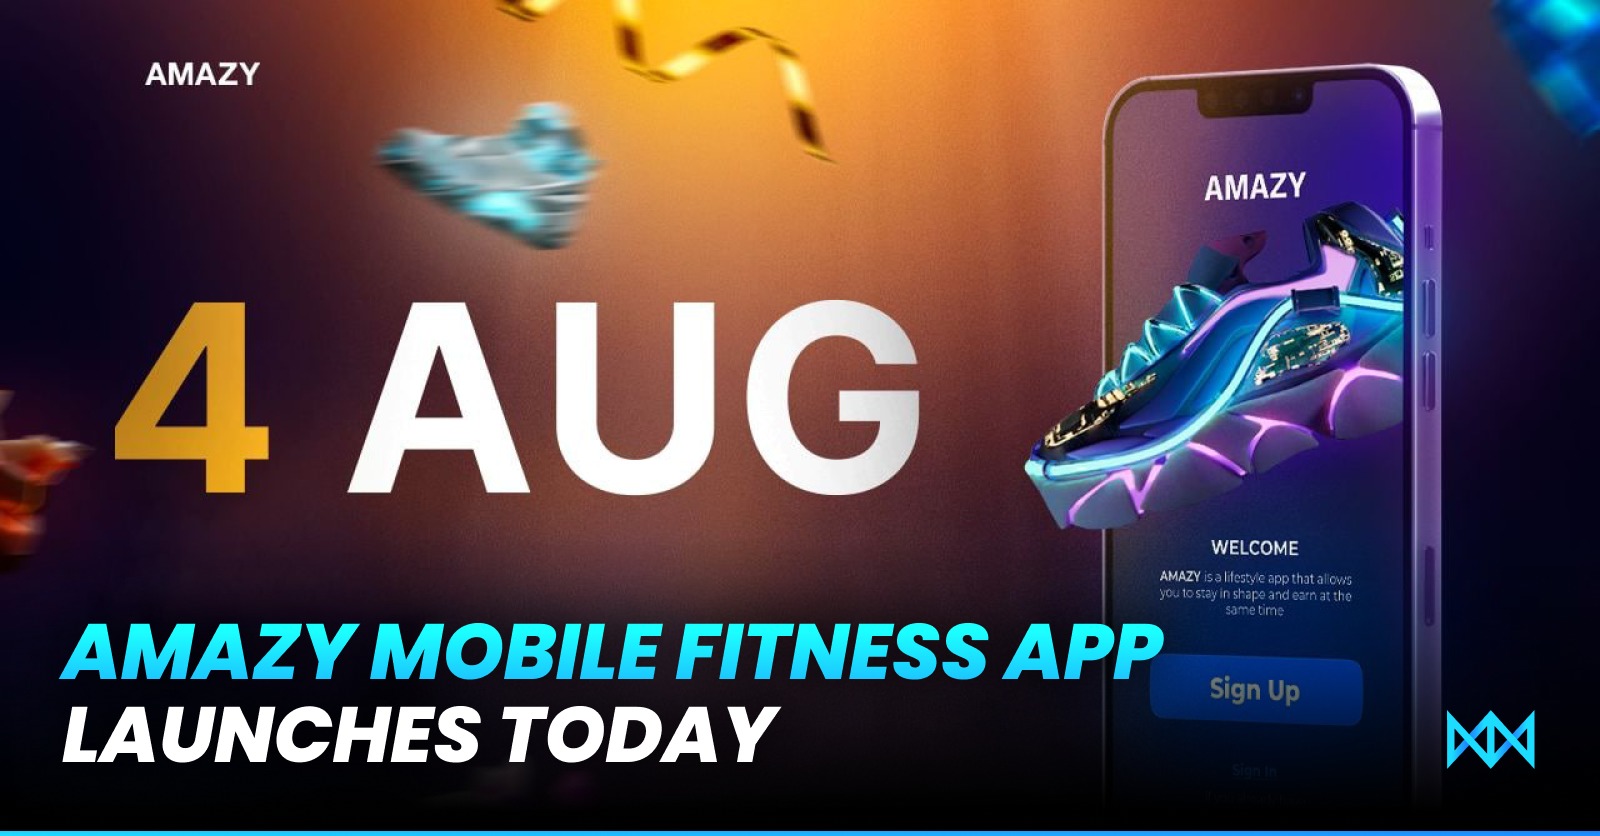 The AMAZY Mobile Fitness App Launches TODAY